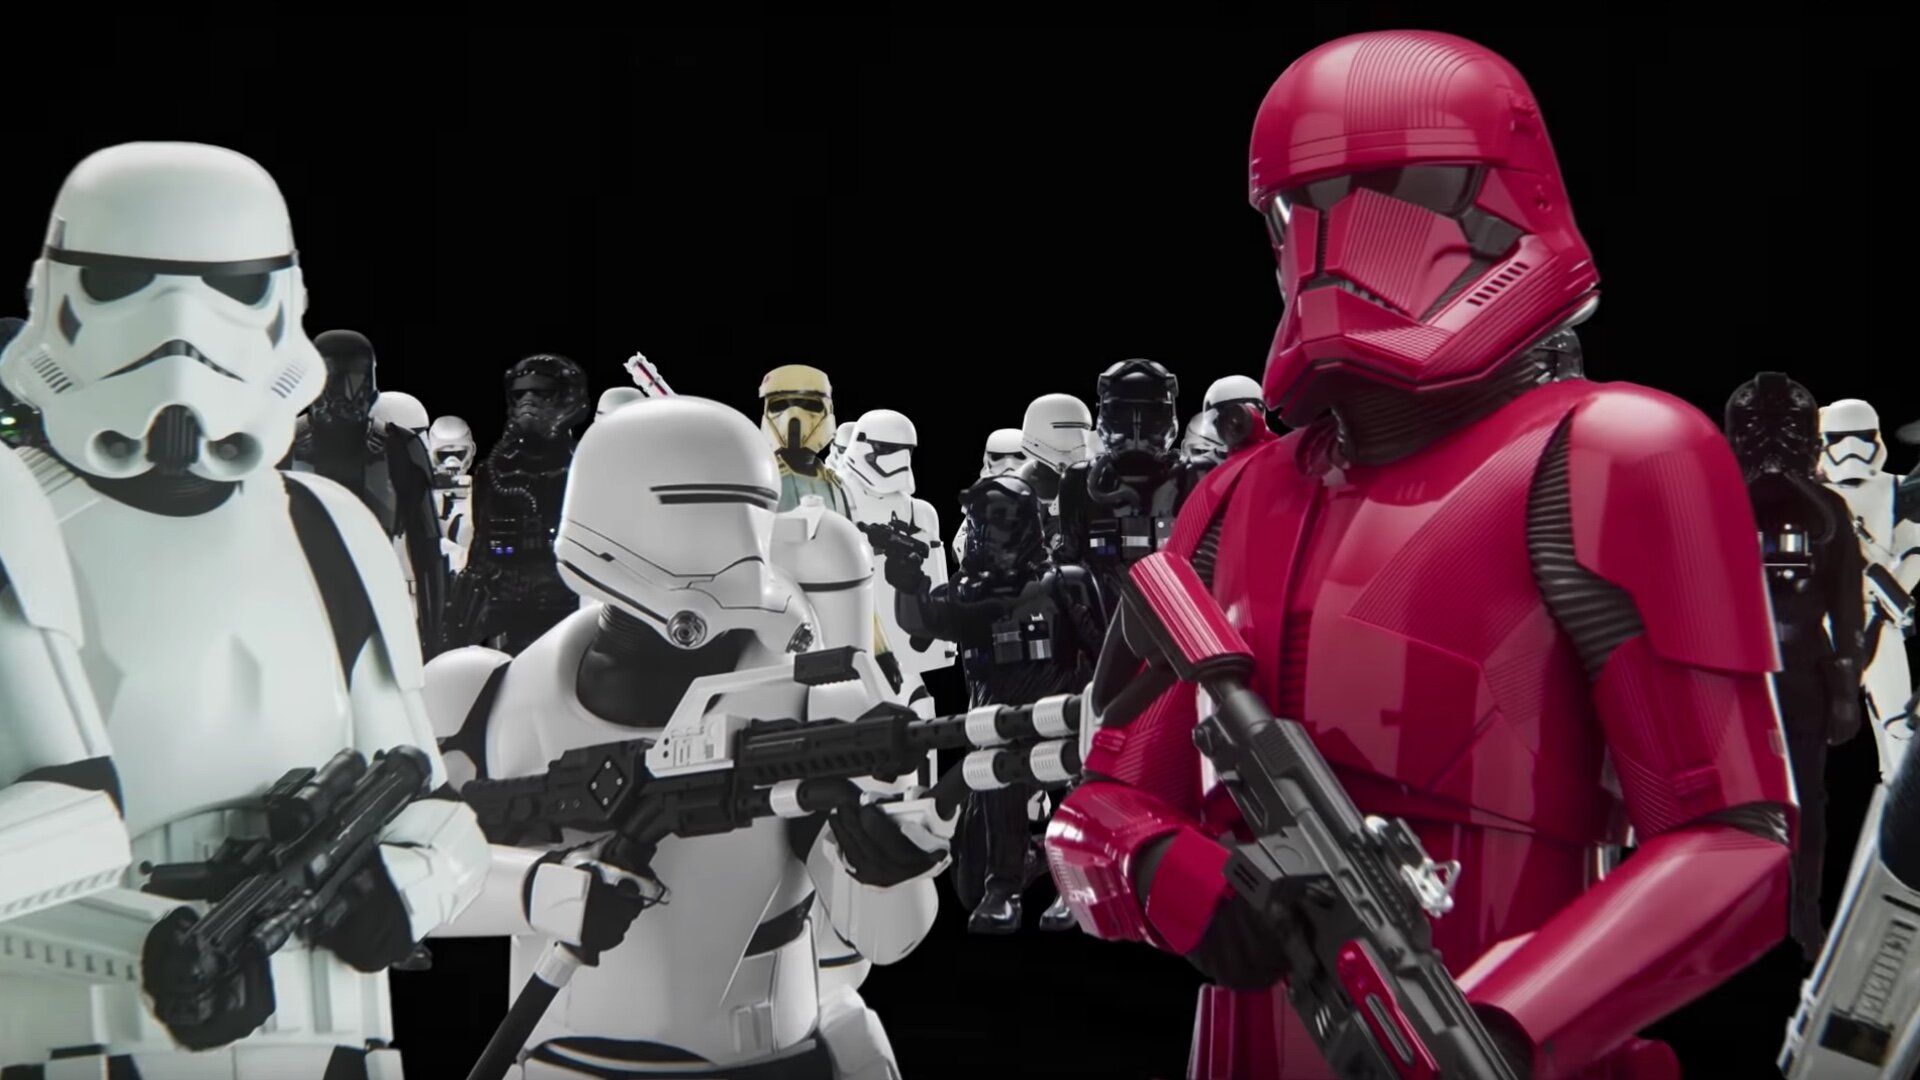 New Video From STAR WARS Focuses on the Evolution of the Stromtrooper